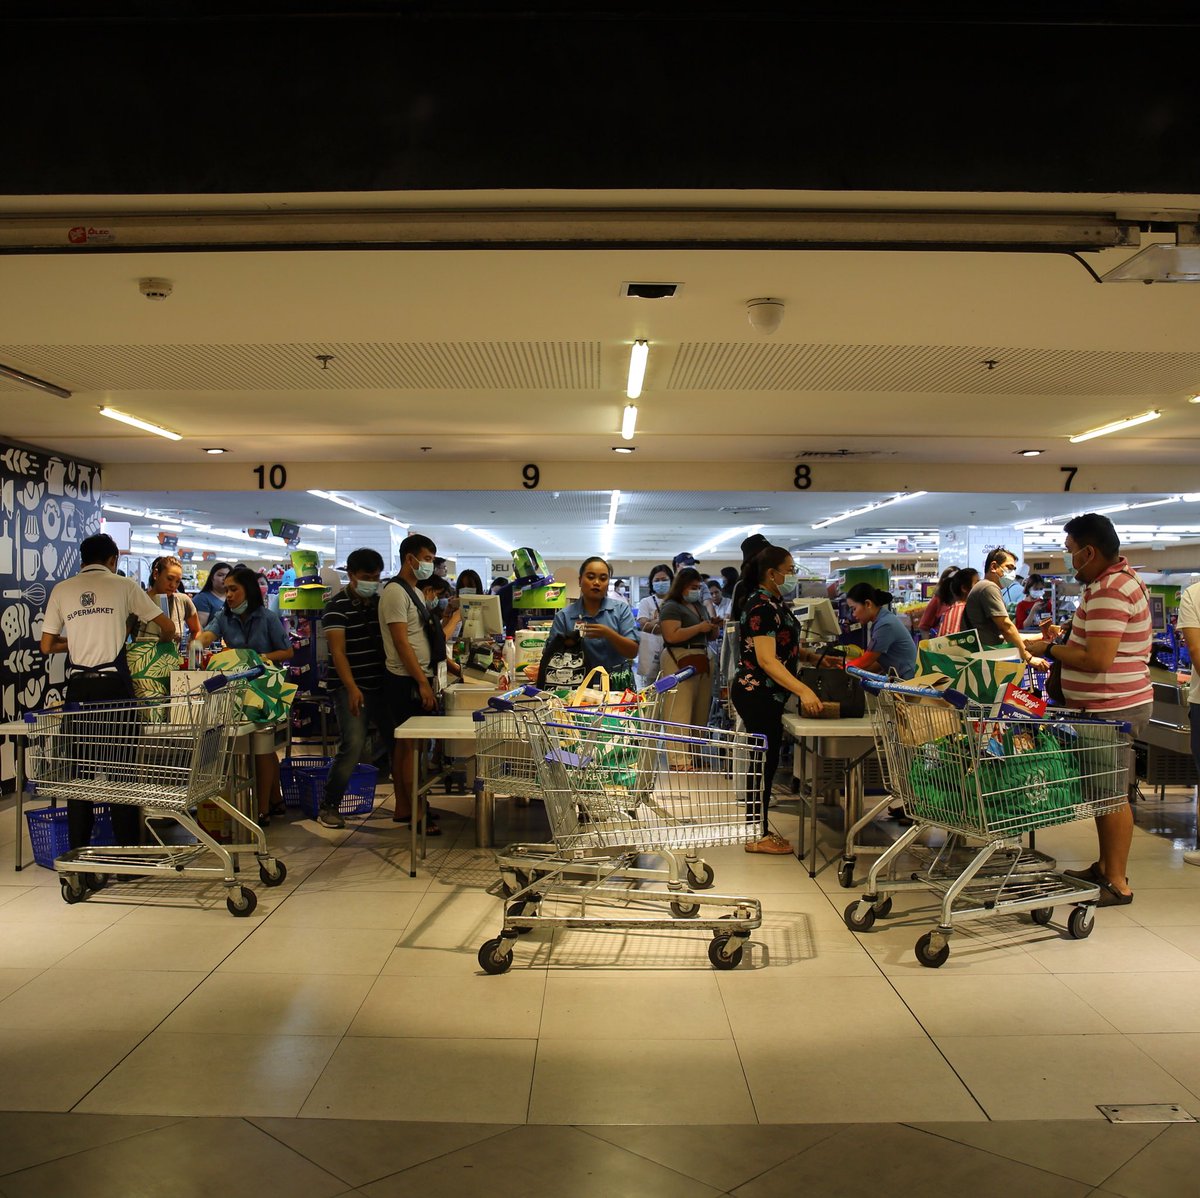 March 14: The final shop before the implementation of curfews and 30-day lockdown of  #Manila starting tomorrow in an attempt to slow the spread of  #covid19  #philippines  #coronavirusph  #coronavirus  #covid_19  https://www.instagram.com/p/B9tzsoWHmfu/?igshid=jrmuh07gqpo1